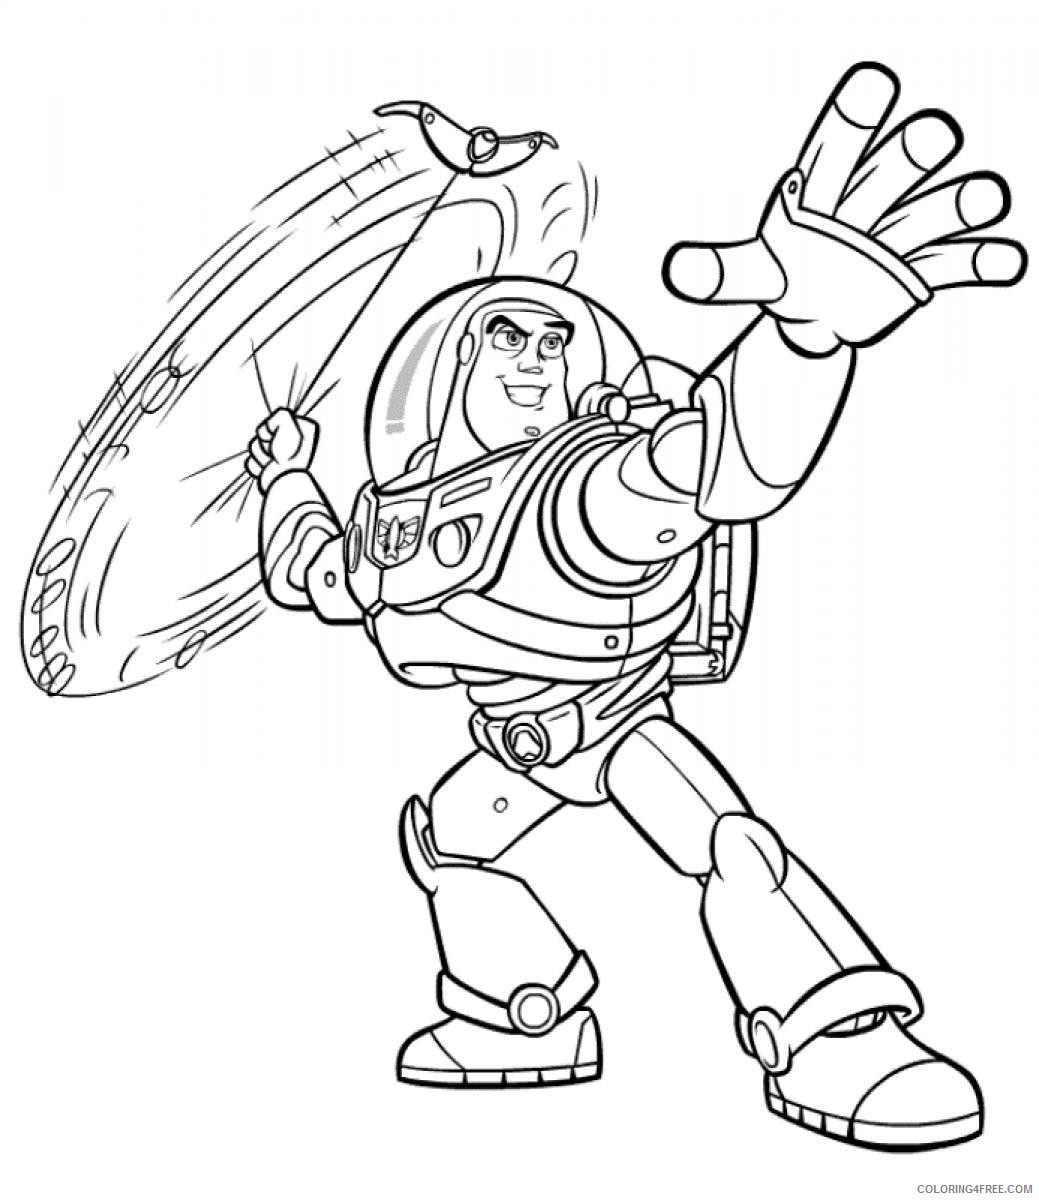 printable buzz lightyear coloring pages Coloring4free